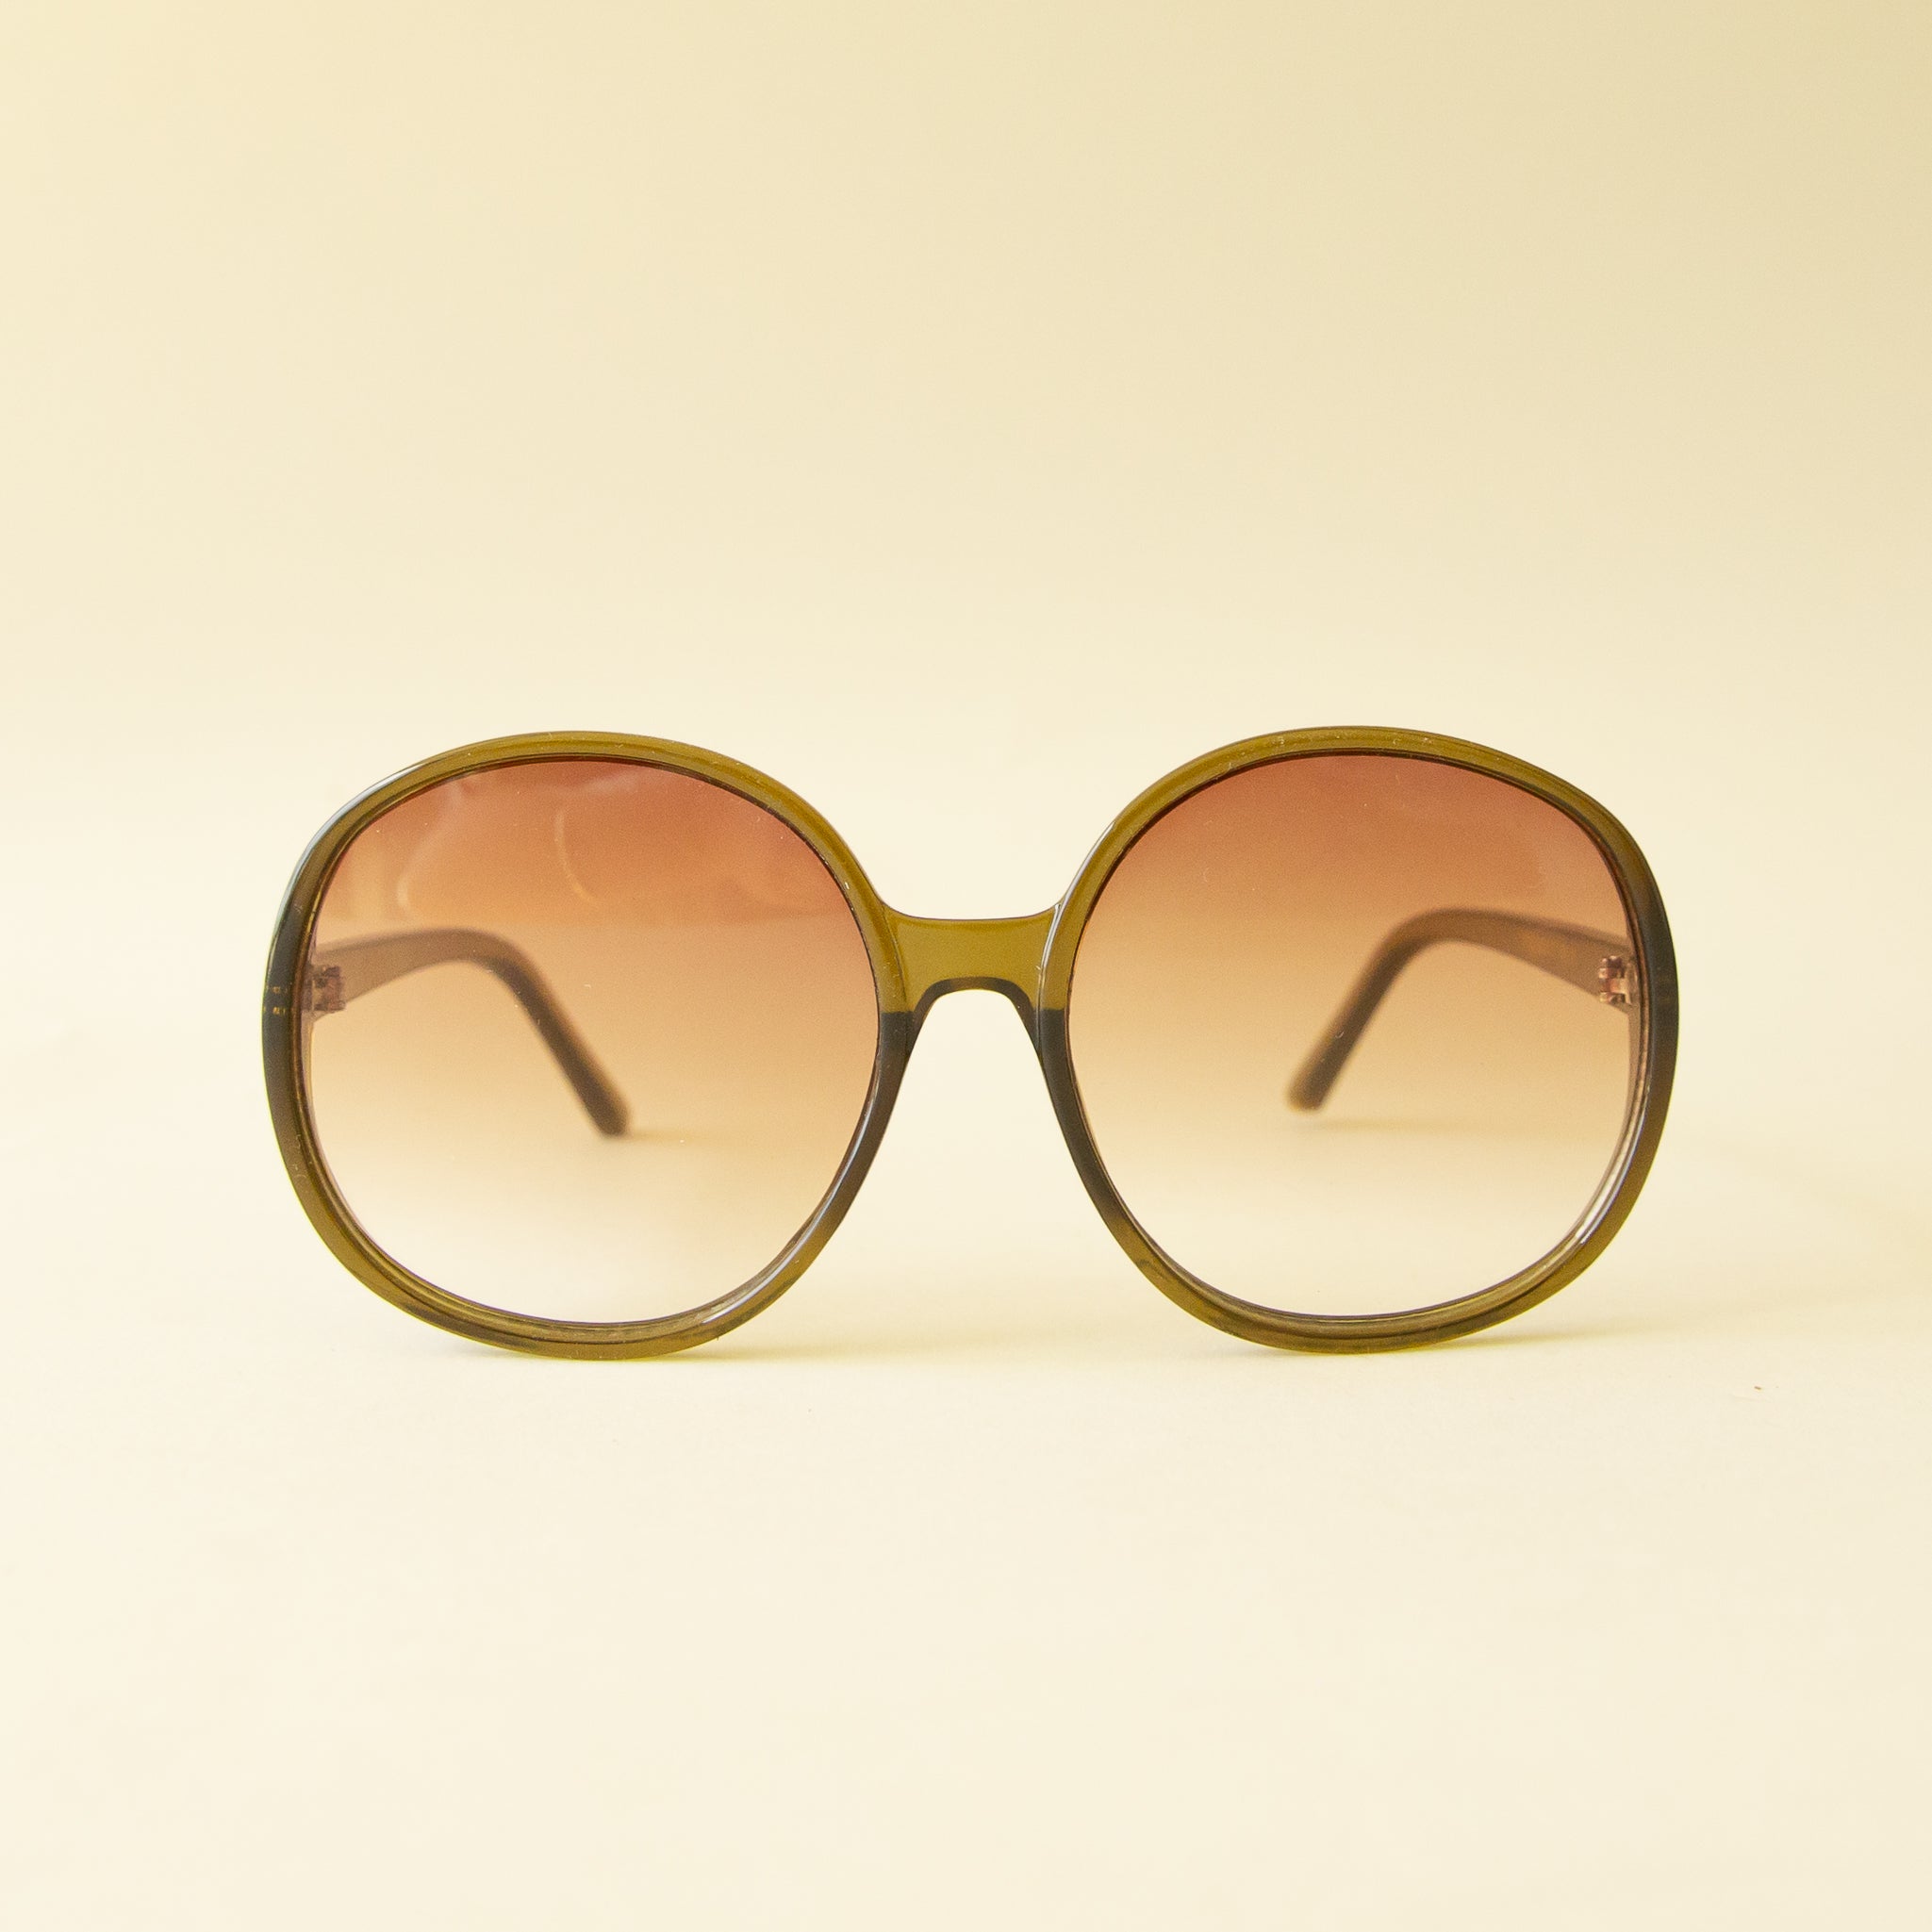 A green translucent pair of round oversized sunglasses with a light brown / pink lens.